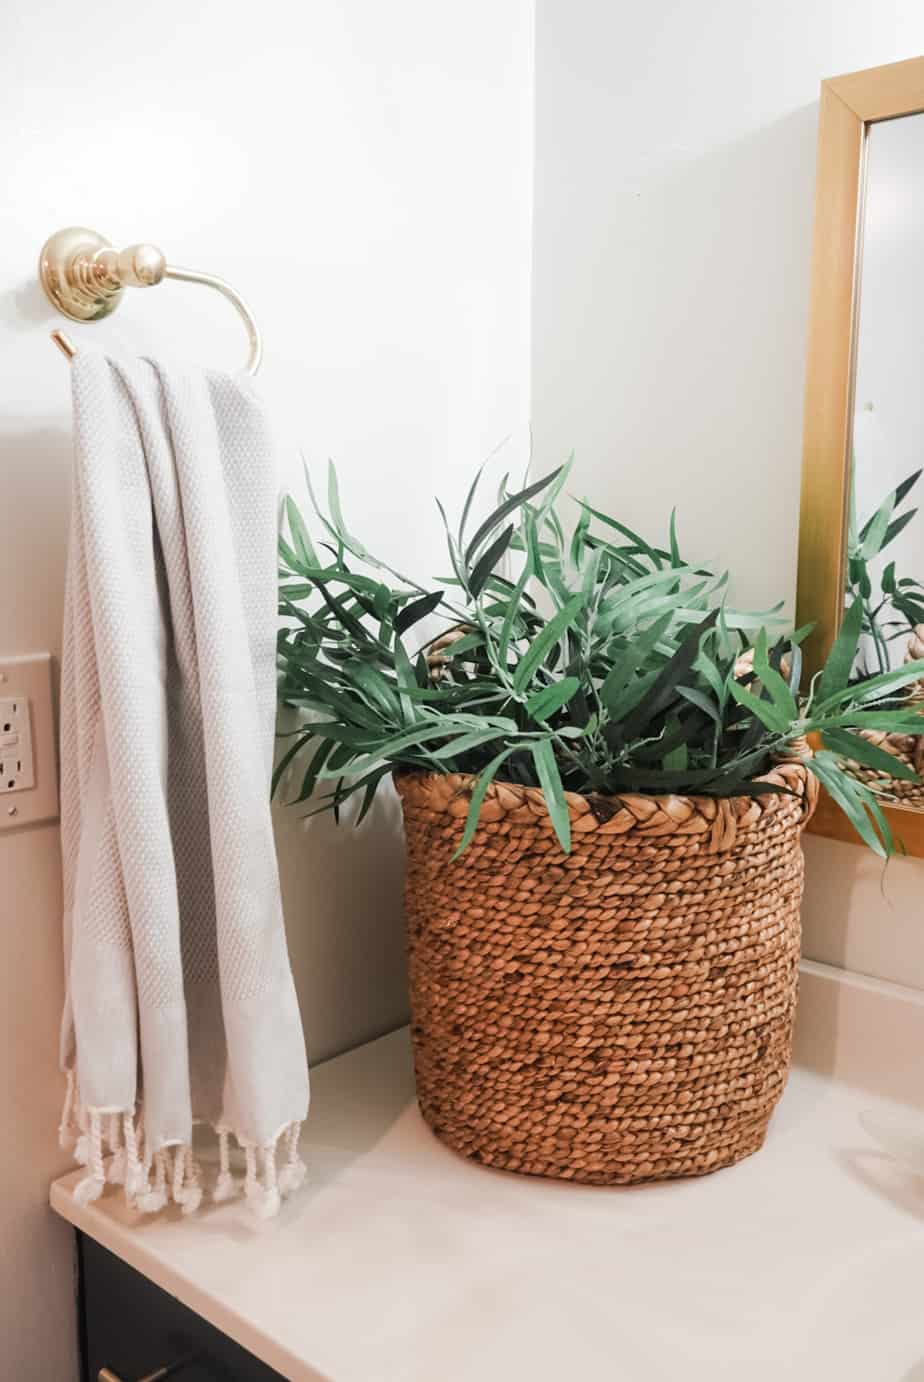 There is a basket filled with a plant on the bathroom counter.